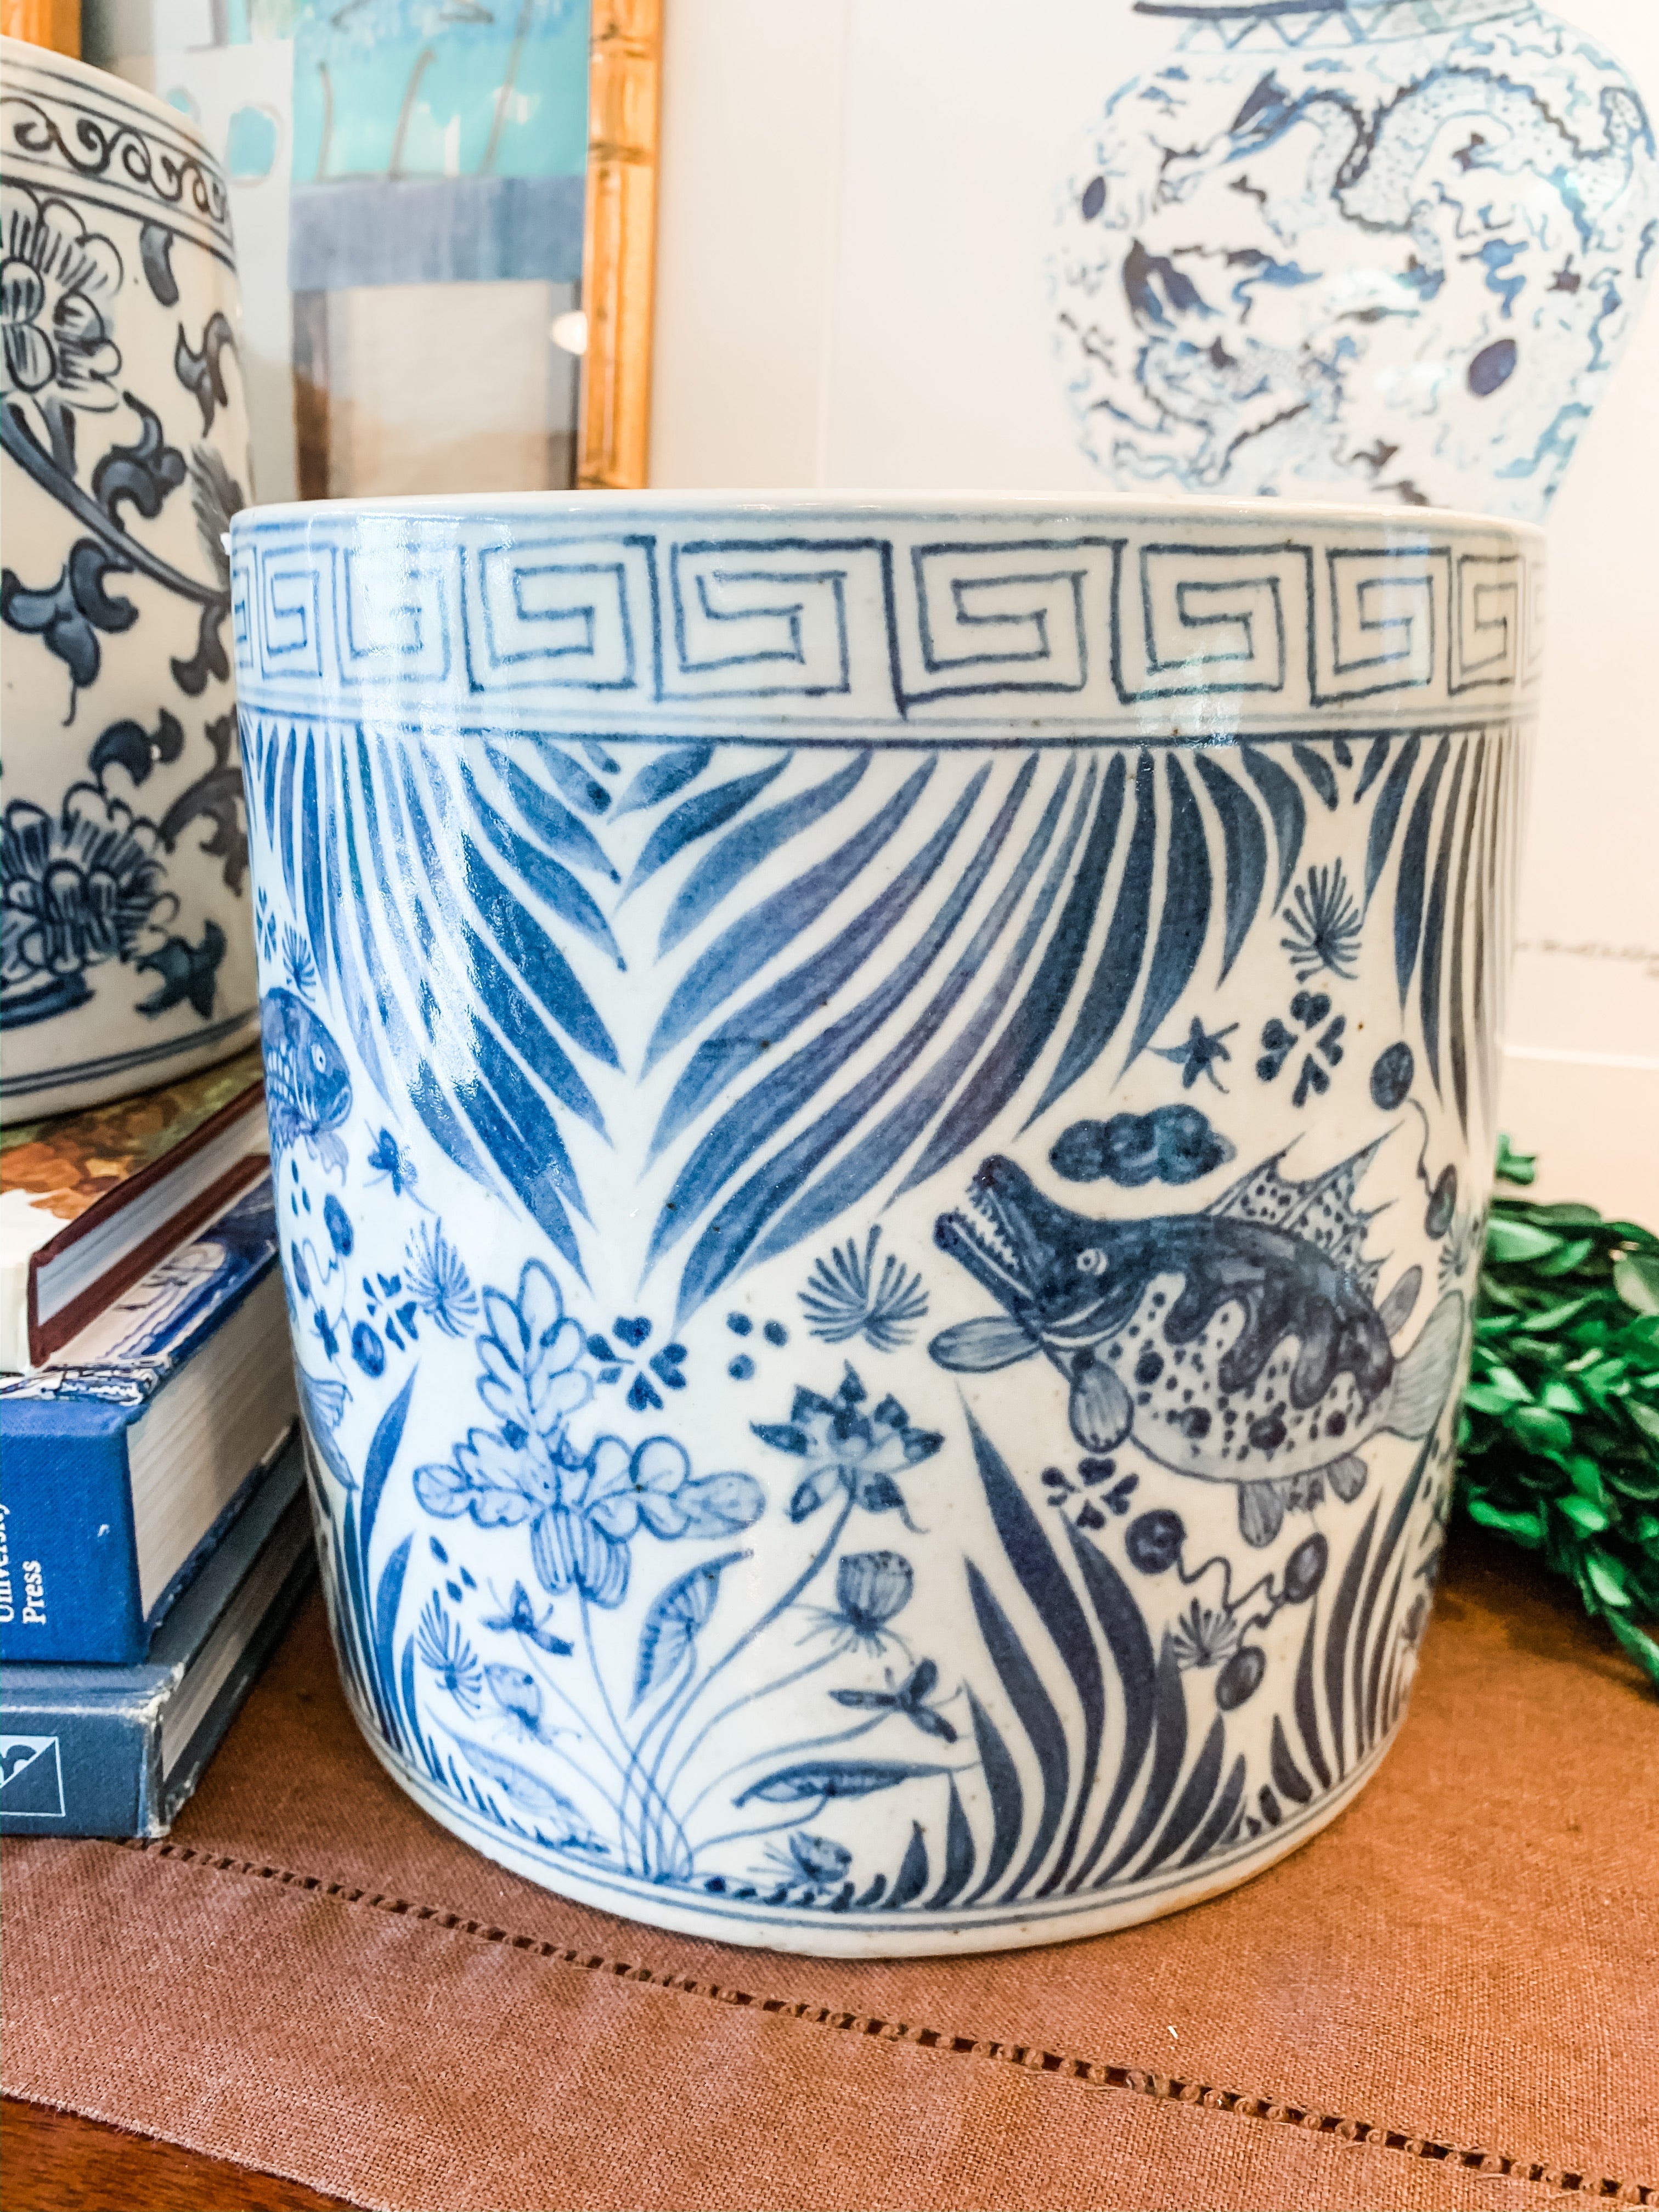 Shop Collectible Brooks for a wide variety of blue and white chinoiserie porcelain.  This is the perfect sized blue and white porcelain cache pot or planter for an orchid, your kitchen utensils, and even a wine chiller! Measures 7.5”x7.5”, hand painted with a fish and greek key design and is in new antique-style condition.